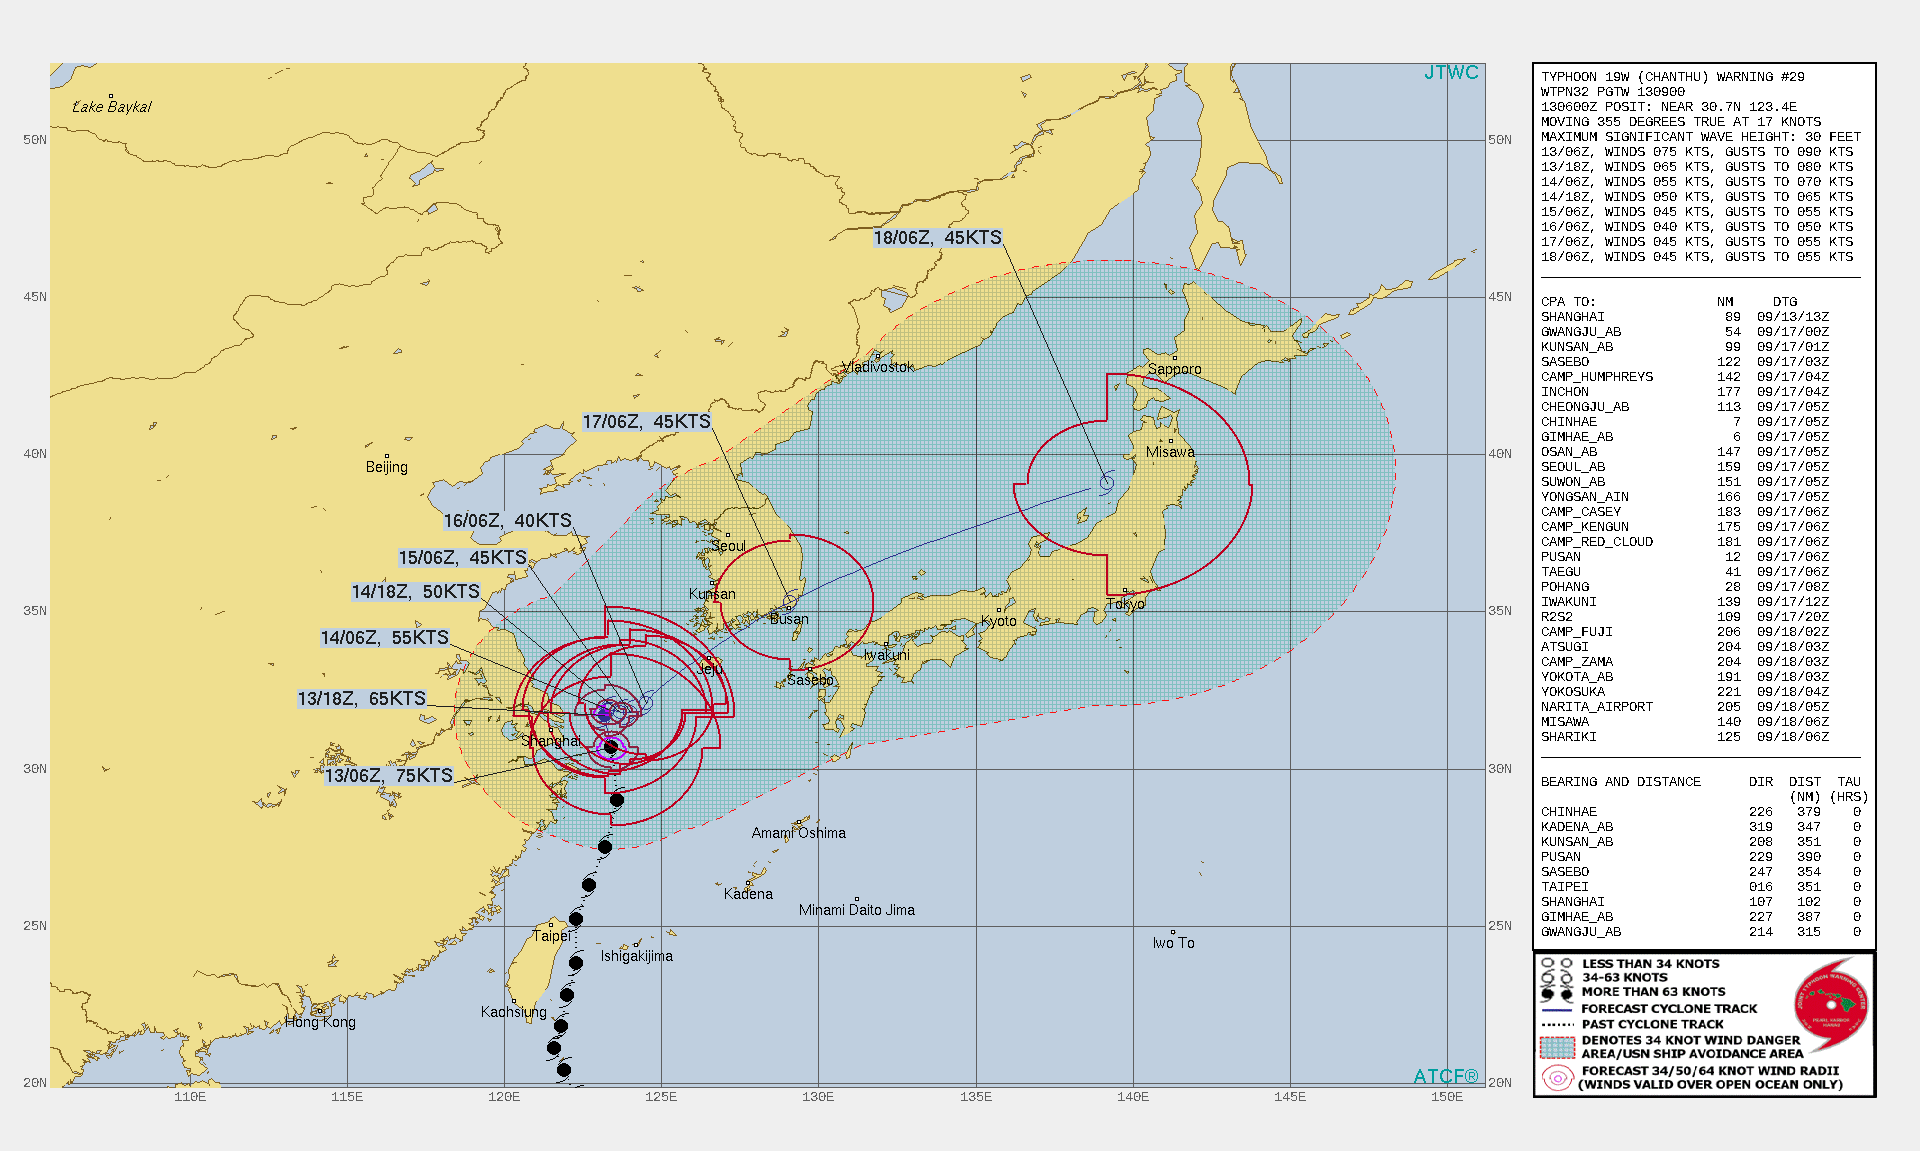 TY 19W(CHANTHU). WARNING 29 ISSUED AT 13/09UTC.SIGNIFICANT FORECAST CHANGES: THERE ARE NO SIGNIFICANT CHANGES TO THE FORECAST FROM THE PREVIOUS WARNING.  FORECAST DISCUSSION: TY 19W HAS CONTINUED TO TRACK RATHER QUICKLY POLEWARD ALONG THE WESTERN PERIPHERY OF THE SUBTROPICAL RIDGE OVER THE PAST SIX HOURS, THOUGH IS SHOWING SOME SIGNS OF SLOWING DOWN AFTER THE 0600Z HOUR. A BUILDING RIDGE TO THE WEST OVER EAST-CENTRAL CHINA IS EXPECTED TO EXTEND EAST ACROSS THE SHANDONG PENINSULA INTO THE YELLOW SEA AND EFFECTIVELY BLOCK FURTHER POLEWARD MOVEMENT AFTER 12H. ONCE THIS RIDGE IS IN PLACE, TY 19W IS FORECAST TO REMAIN QUASI-STATIONARY OR DRIFT SLOWLY EASTWARD IN A COMPETING STEERING FLOW BETWEEN THE RIDGE TO THE WEST AND THE LARGE STR EAST-SOUTHEAST OF JAPAN. WHILE VERTICAL WIND SHEAR(VWS) IS FORECAST TO DECREASE AFTER 12H, THE QUASI-STATIONARY MOTION OVER RELATIVELY COOL AND LOW OCEAN HEAT CONTENT WATERS, COMBINED WITH A REDUCTION IN OUTFLOW ALOFT, WILL RESULT IN STEADY WEAKENING TO 40 KNOTS BY 72H. AFTER 48H, AN APPROACHING MID-LATITUDE TROUGH WILL ERODE THE WESTERN RIDGE AND BY 72H WILL EJECT TY 19W OUT OF THE WEAK STEERING FLOW AND ACCELERATE NORTHEASTWARD. THE SYSTEM WILL BEGIN EXTRA-TROPICAL TRANSITION (ETT) BY 96H AS IT BEGINS TO INTERACT WITH THE BAROCLINIC ZONE. AS THE SYSTEM ACCELERATES NORTHEAST ALONG THE SOUTHERN COAST OF KOREA, IT WILL INCREASE SLIGHTLY IN INTENSITY AS ROBUST POLEWARD OUTFLOW OFFSETS INCREASING VWS. BY 120H THE SYSTEM WILL COMPLETE ETT AS IT MOVES UNDER THE 200MB JET AND DEVELOPS FRONTAL CHARACTERISTICS.